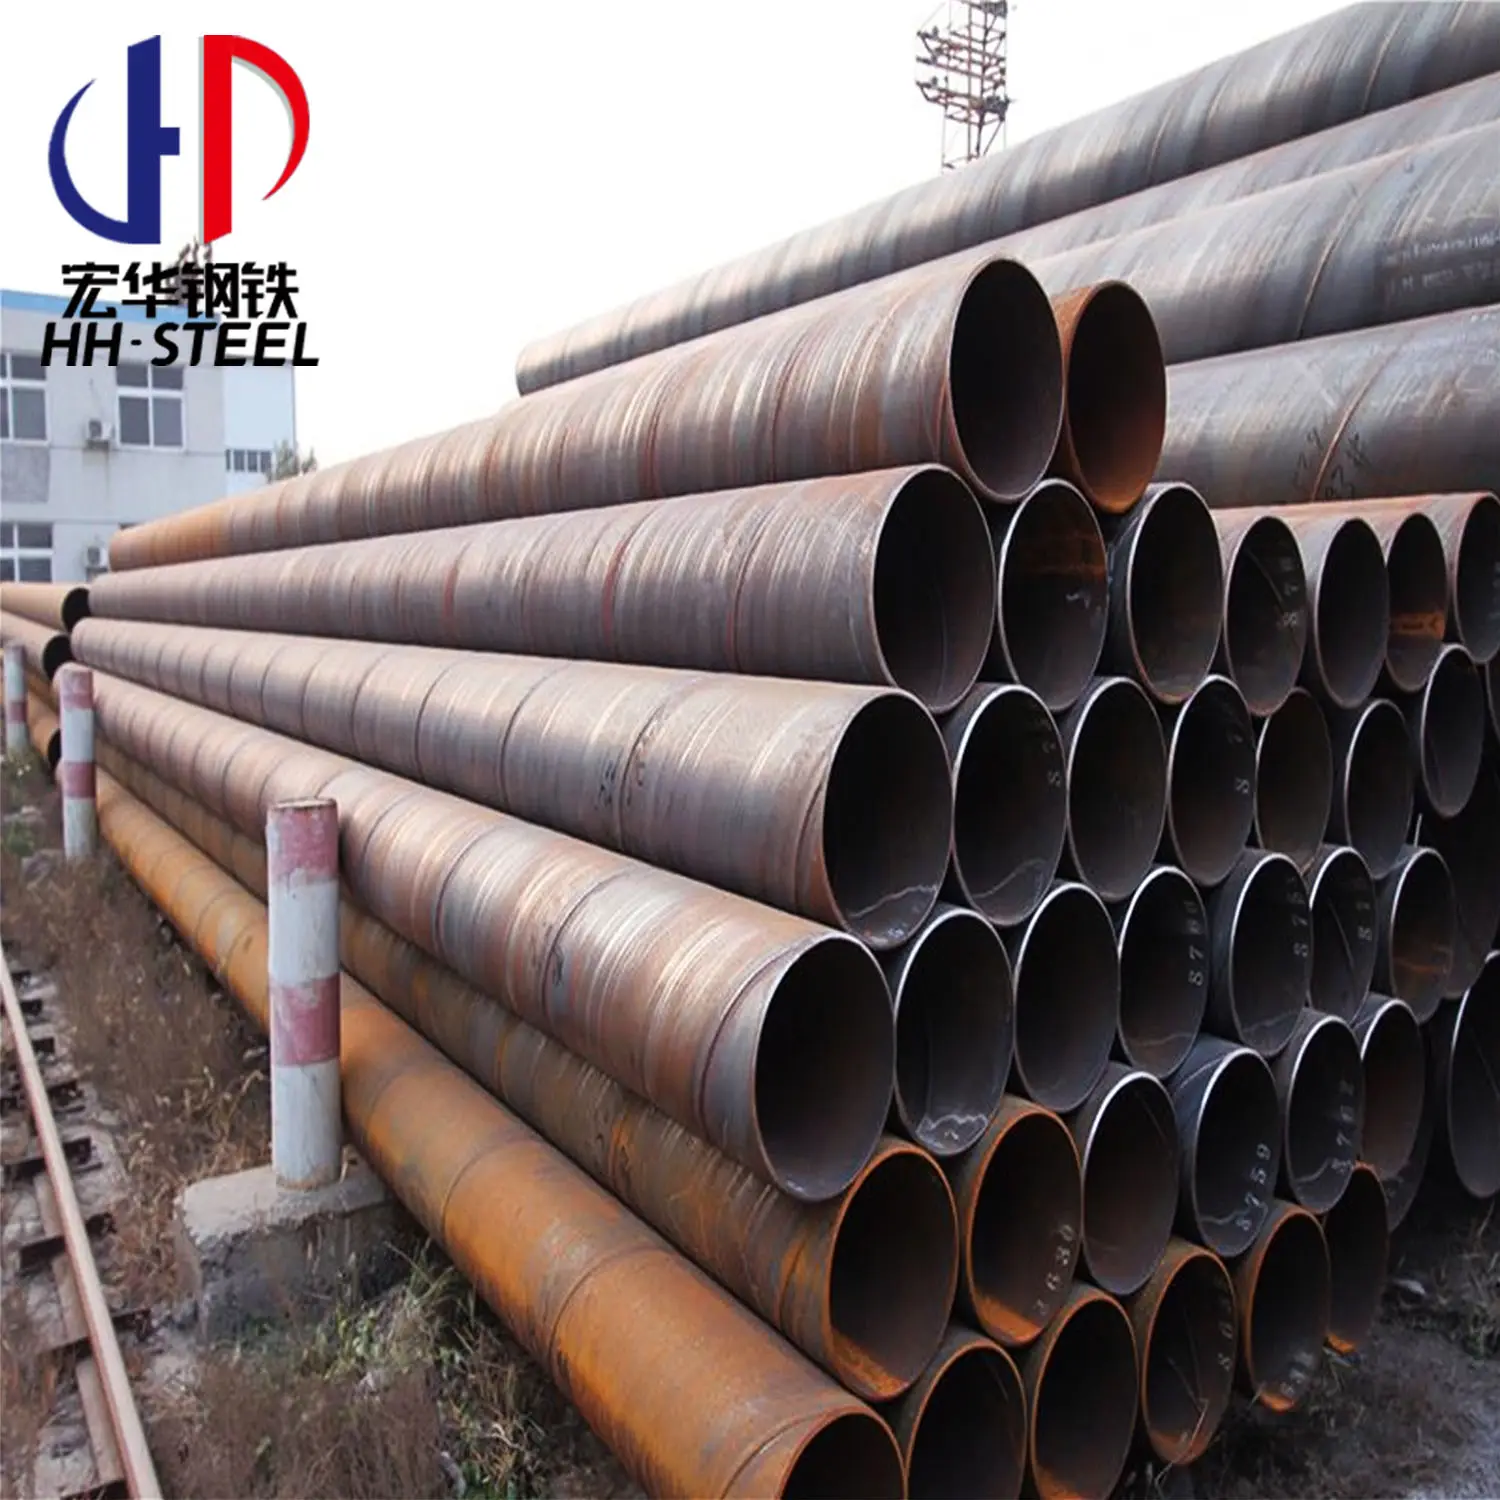 High Quality Hot Rolled ERW Carbon Steel Pipes 6m round Structure Pipe Q345 Grade with Straight Seamless Welding